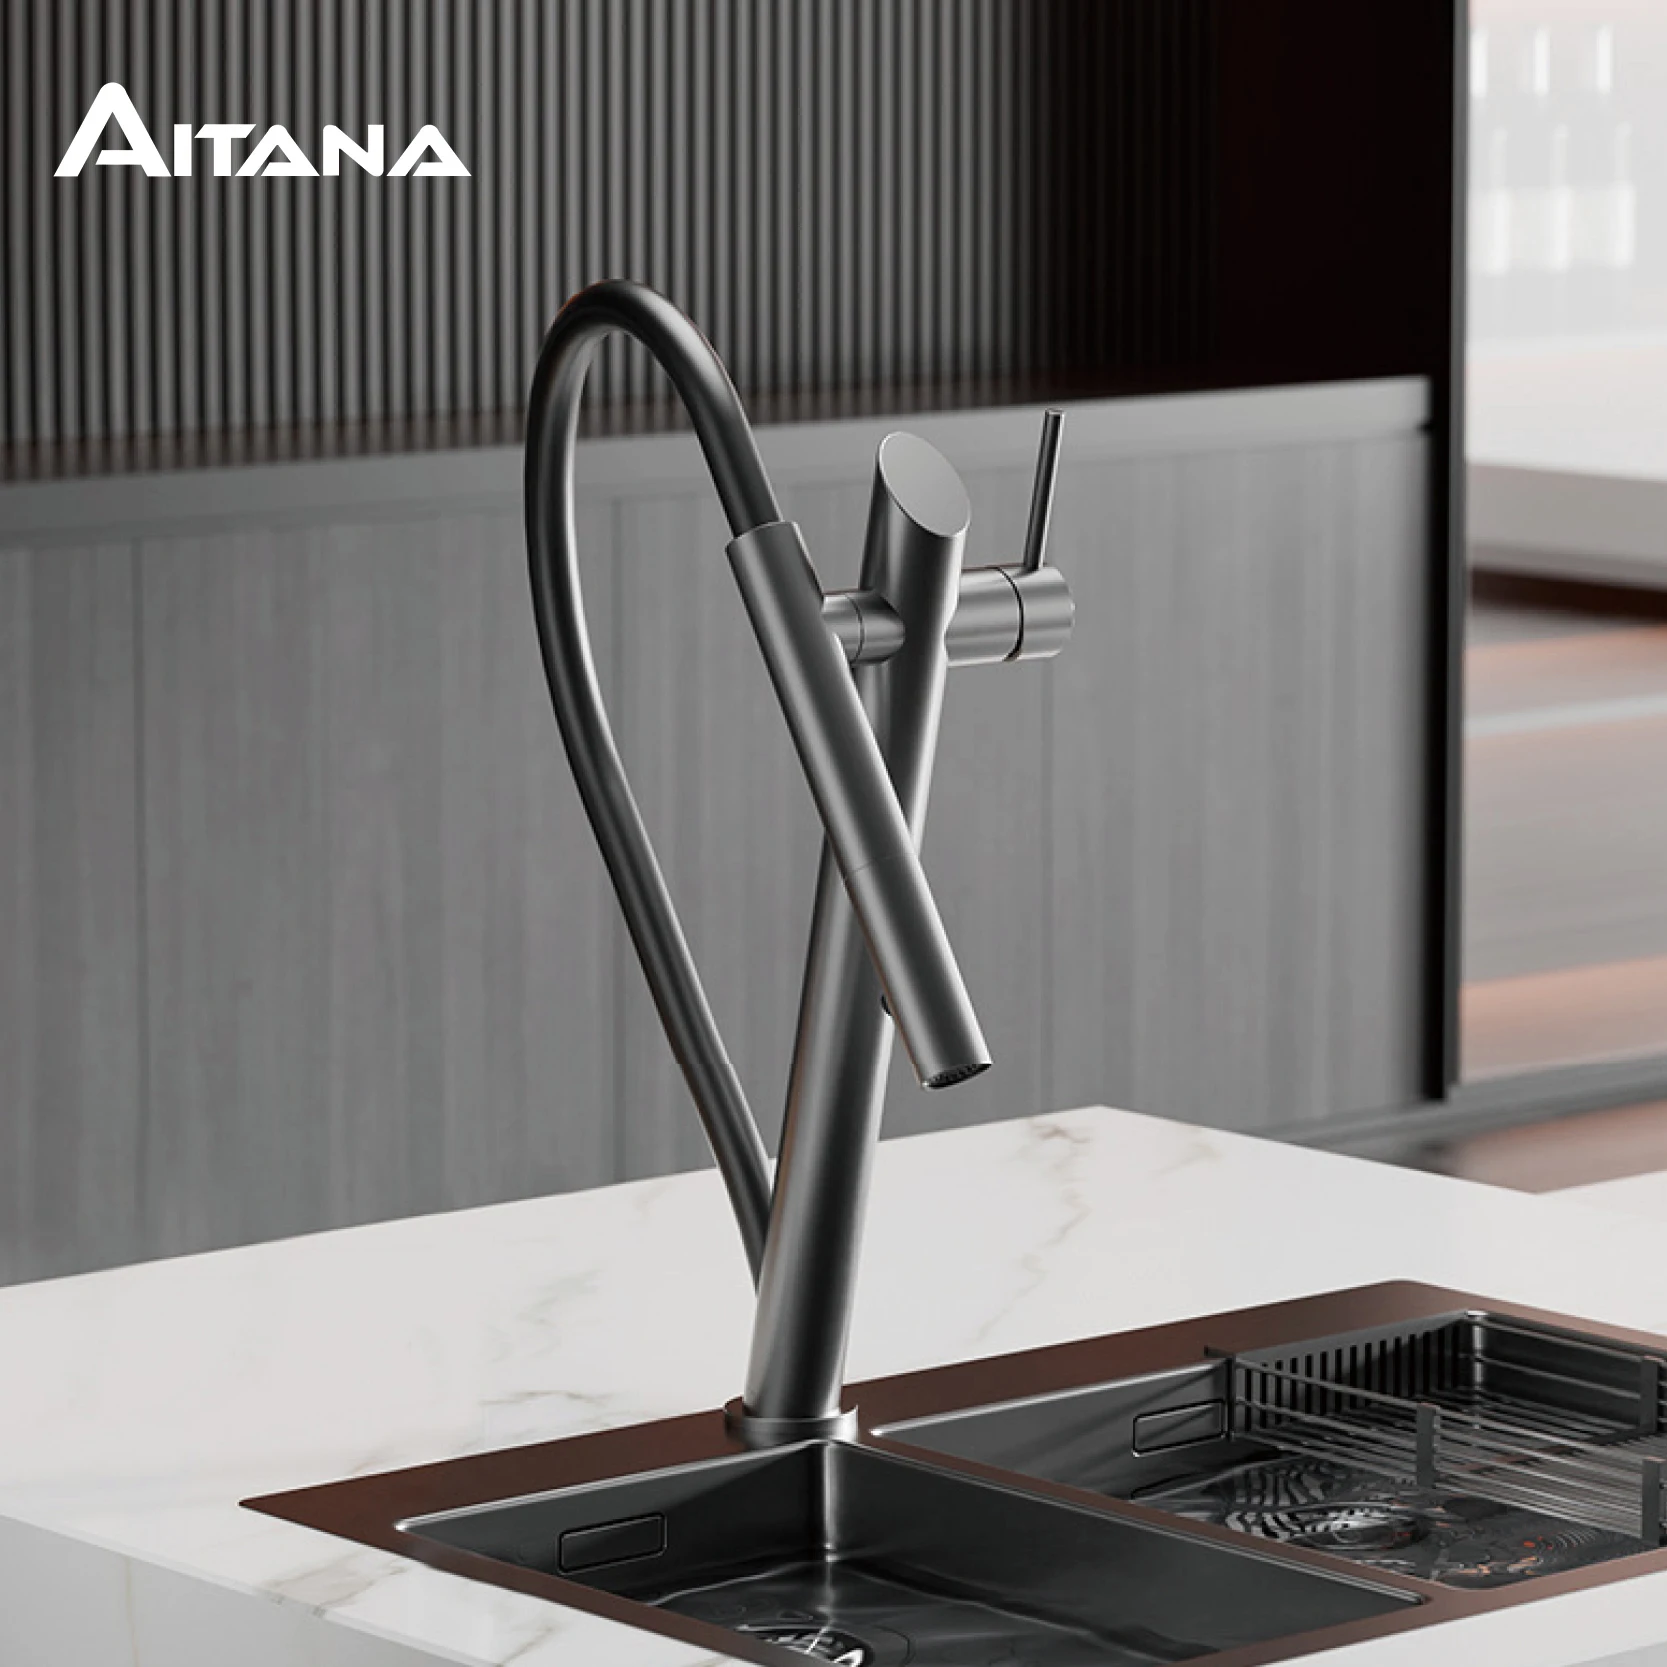 

AITANA luxury brass black kitchen faucet with pull-out design, dual control magnetic suction for cold & hot 2-function sink Tap